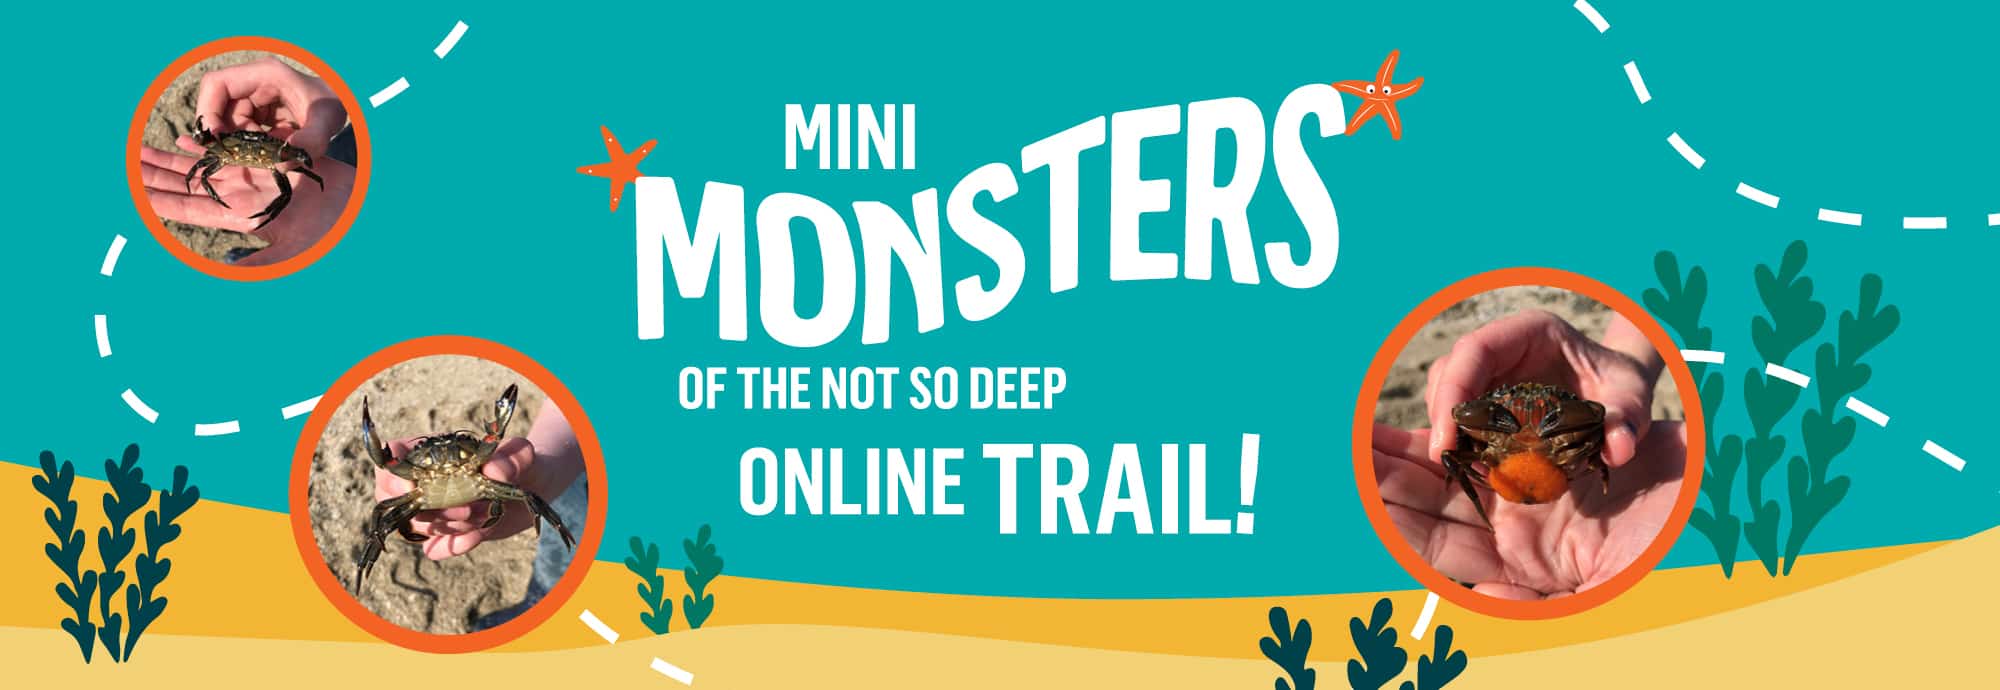 White text against a blue-green background reads 'mini monsters of the not so deep online trail!'. Three circular photos show hands holding crabs up to the camera. Along the bottom of the image is sand.